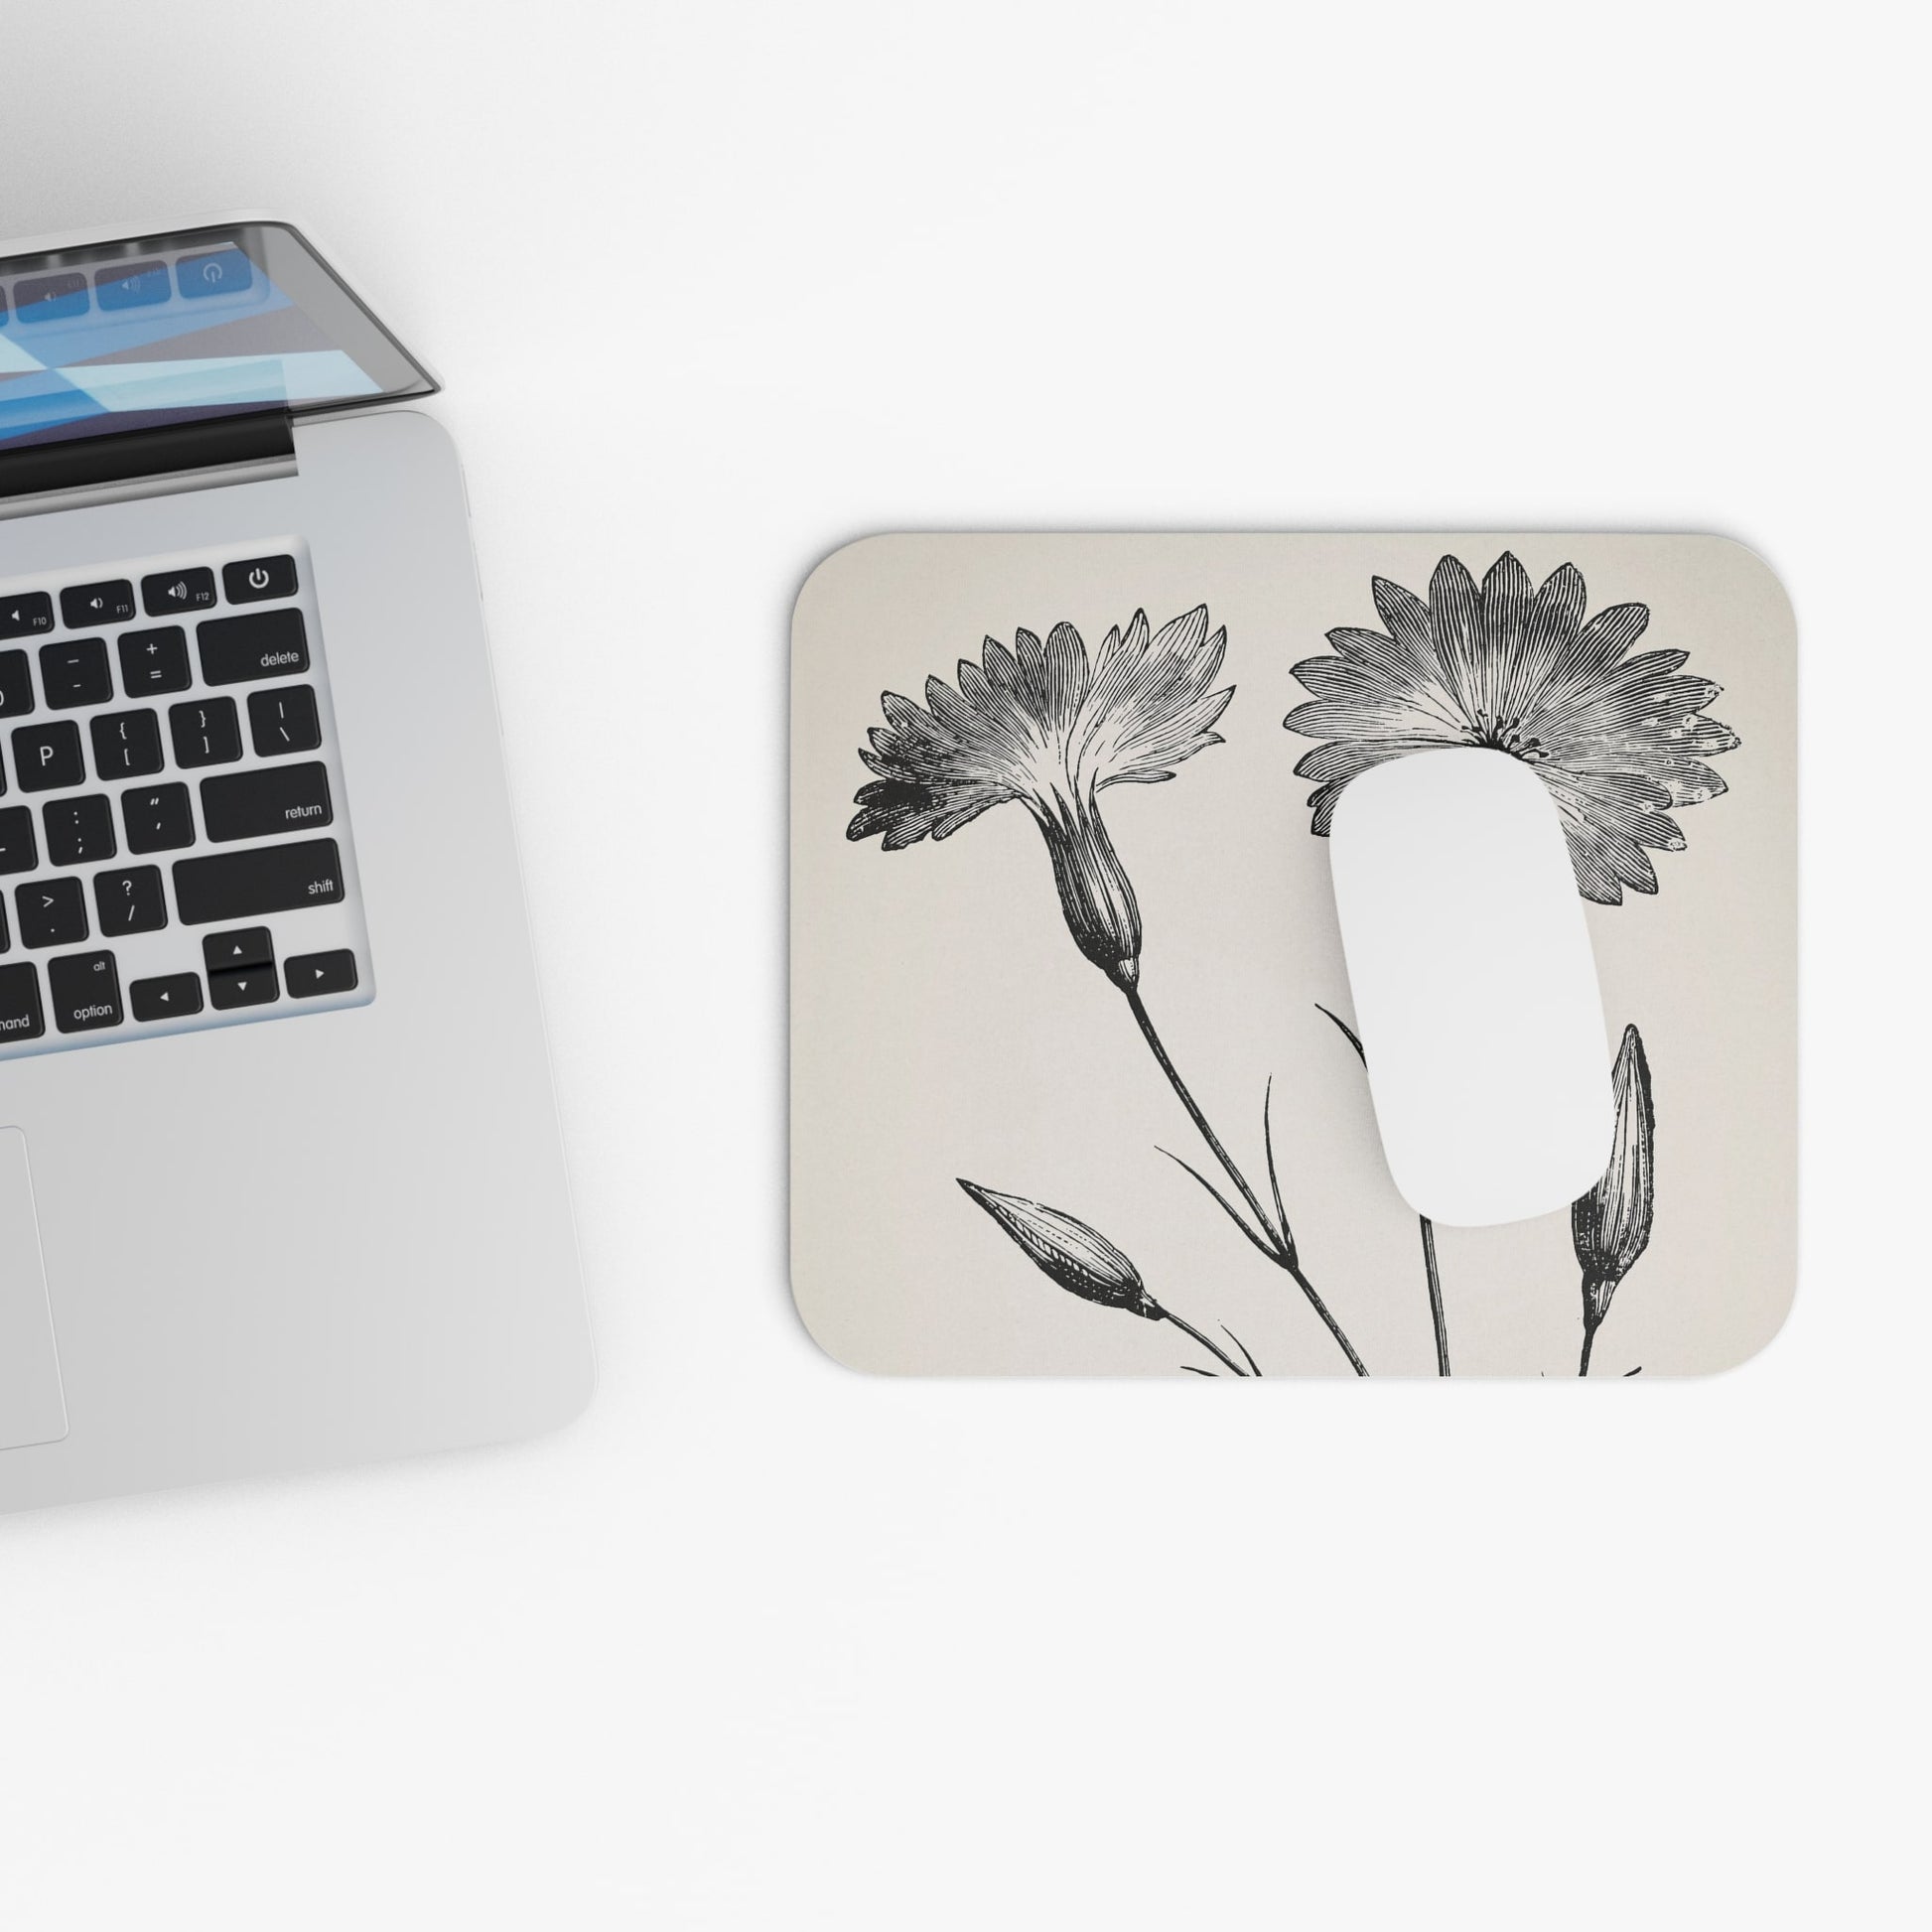 Vintage Floral Design Laptop Mouse Pad with White Mouse